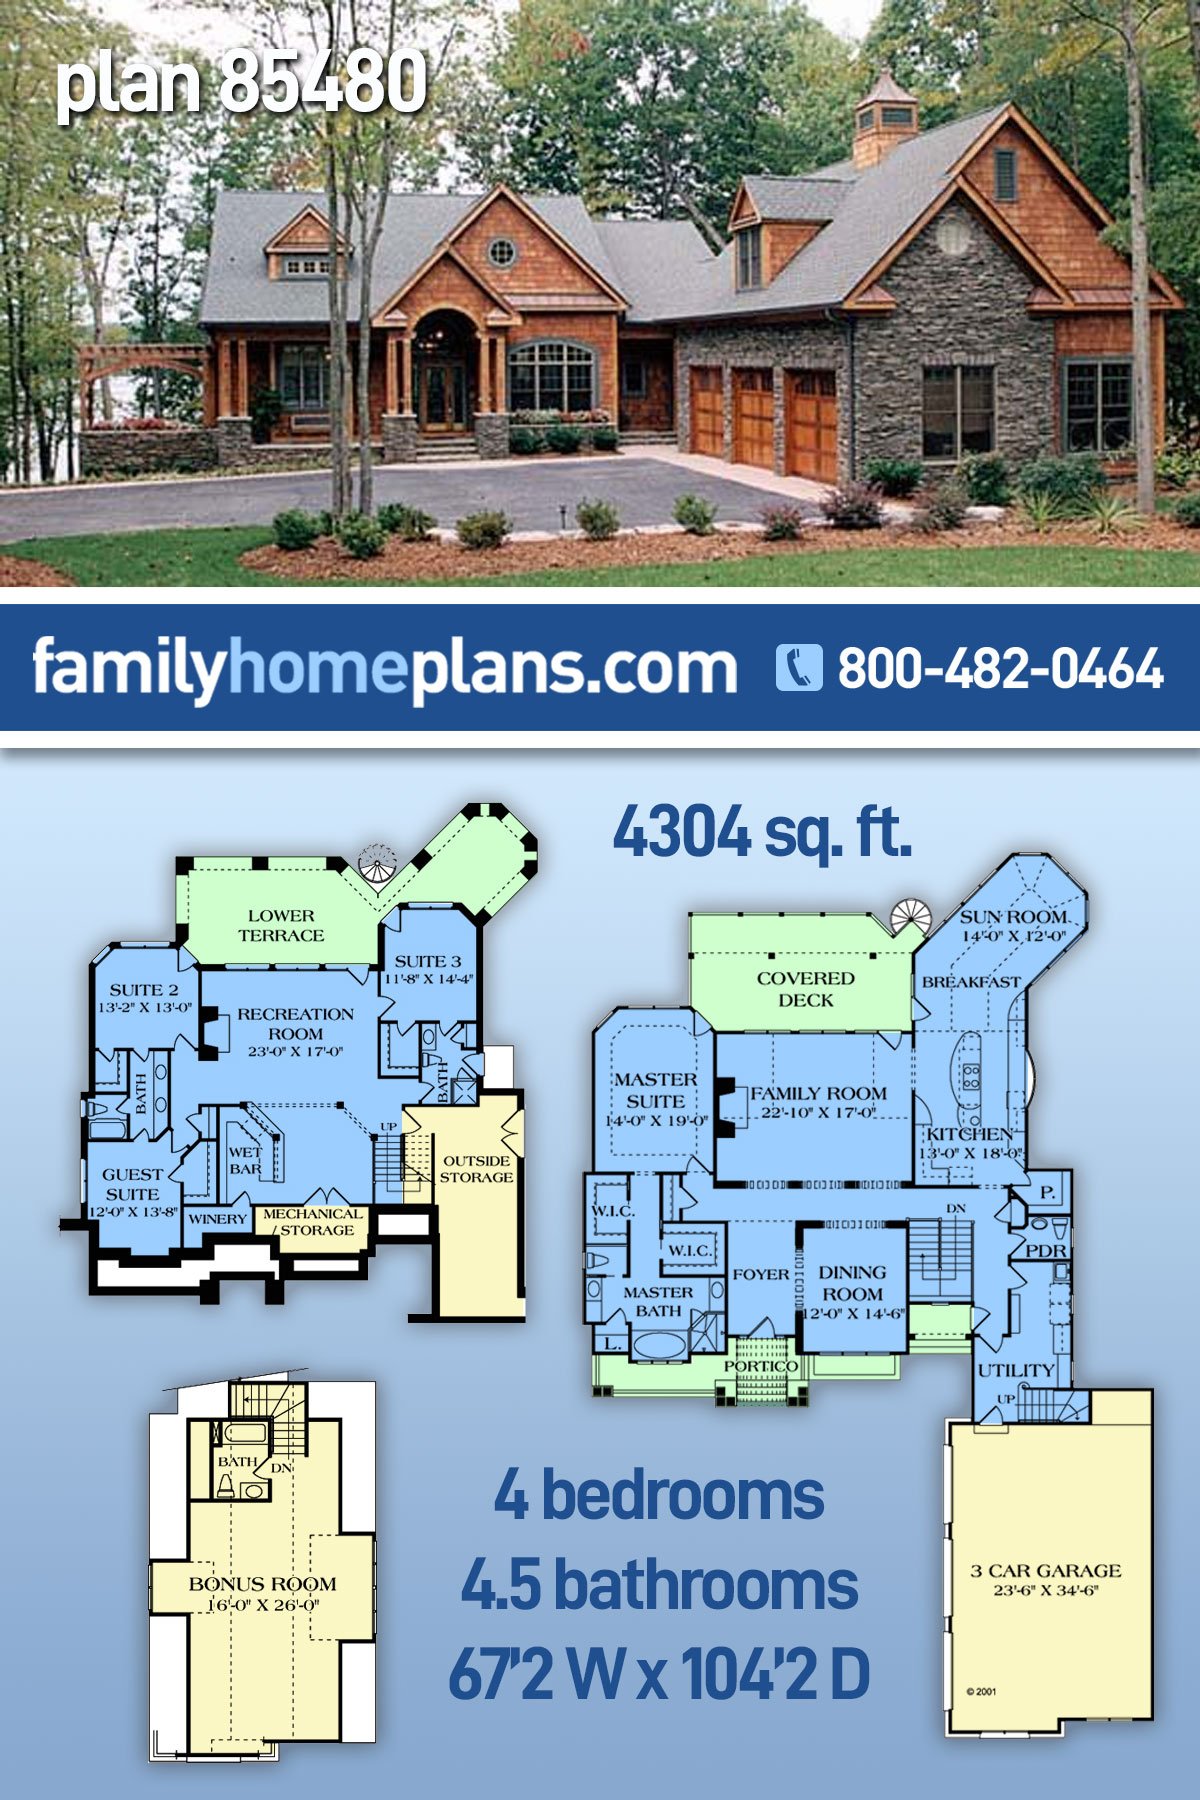 Plan 85480 | 4 Bedroom Craftsman Style Hillside House Plan with 4